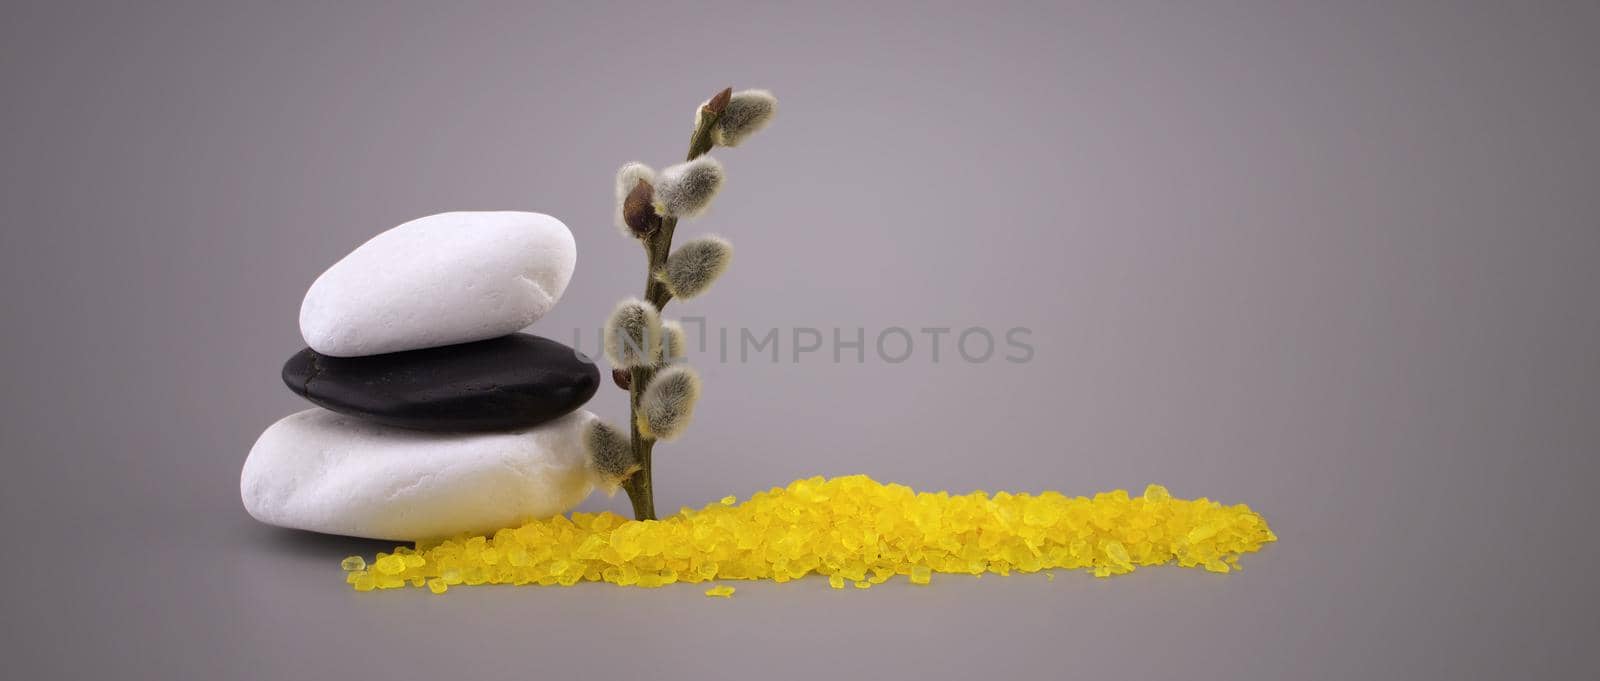 Zen still life with stacked stones, catkin and yellow crystals or granules in a panorama design template on grey with copyspace and side vignette